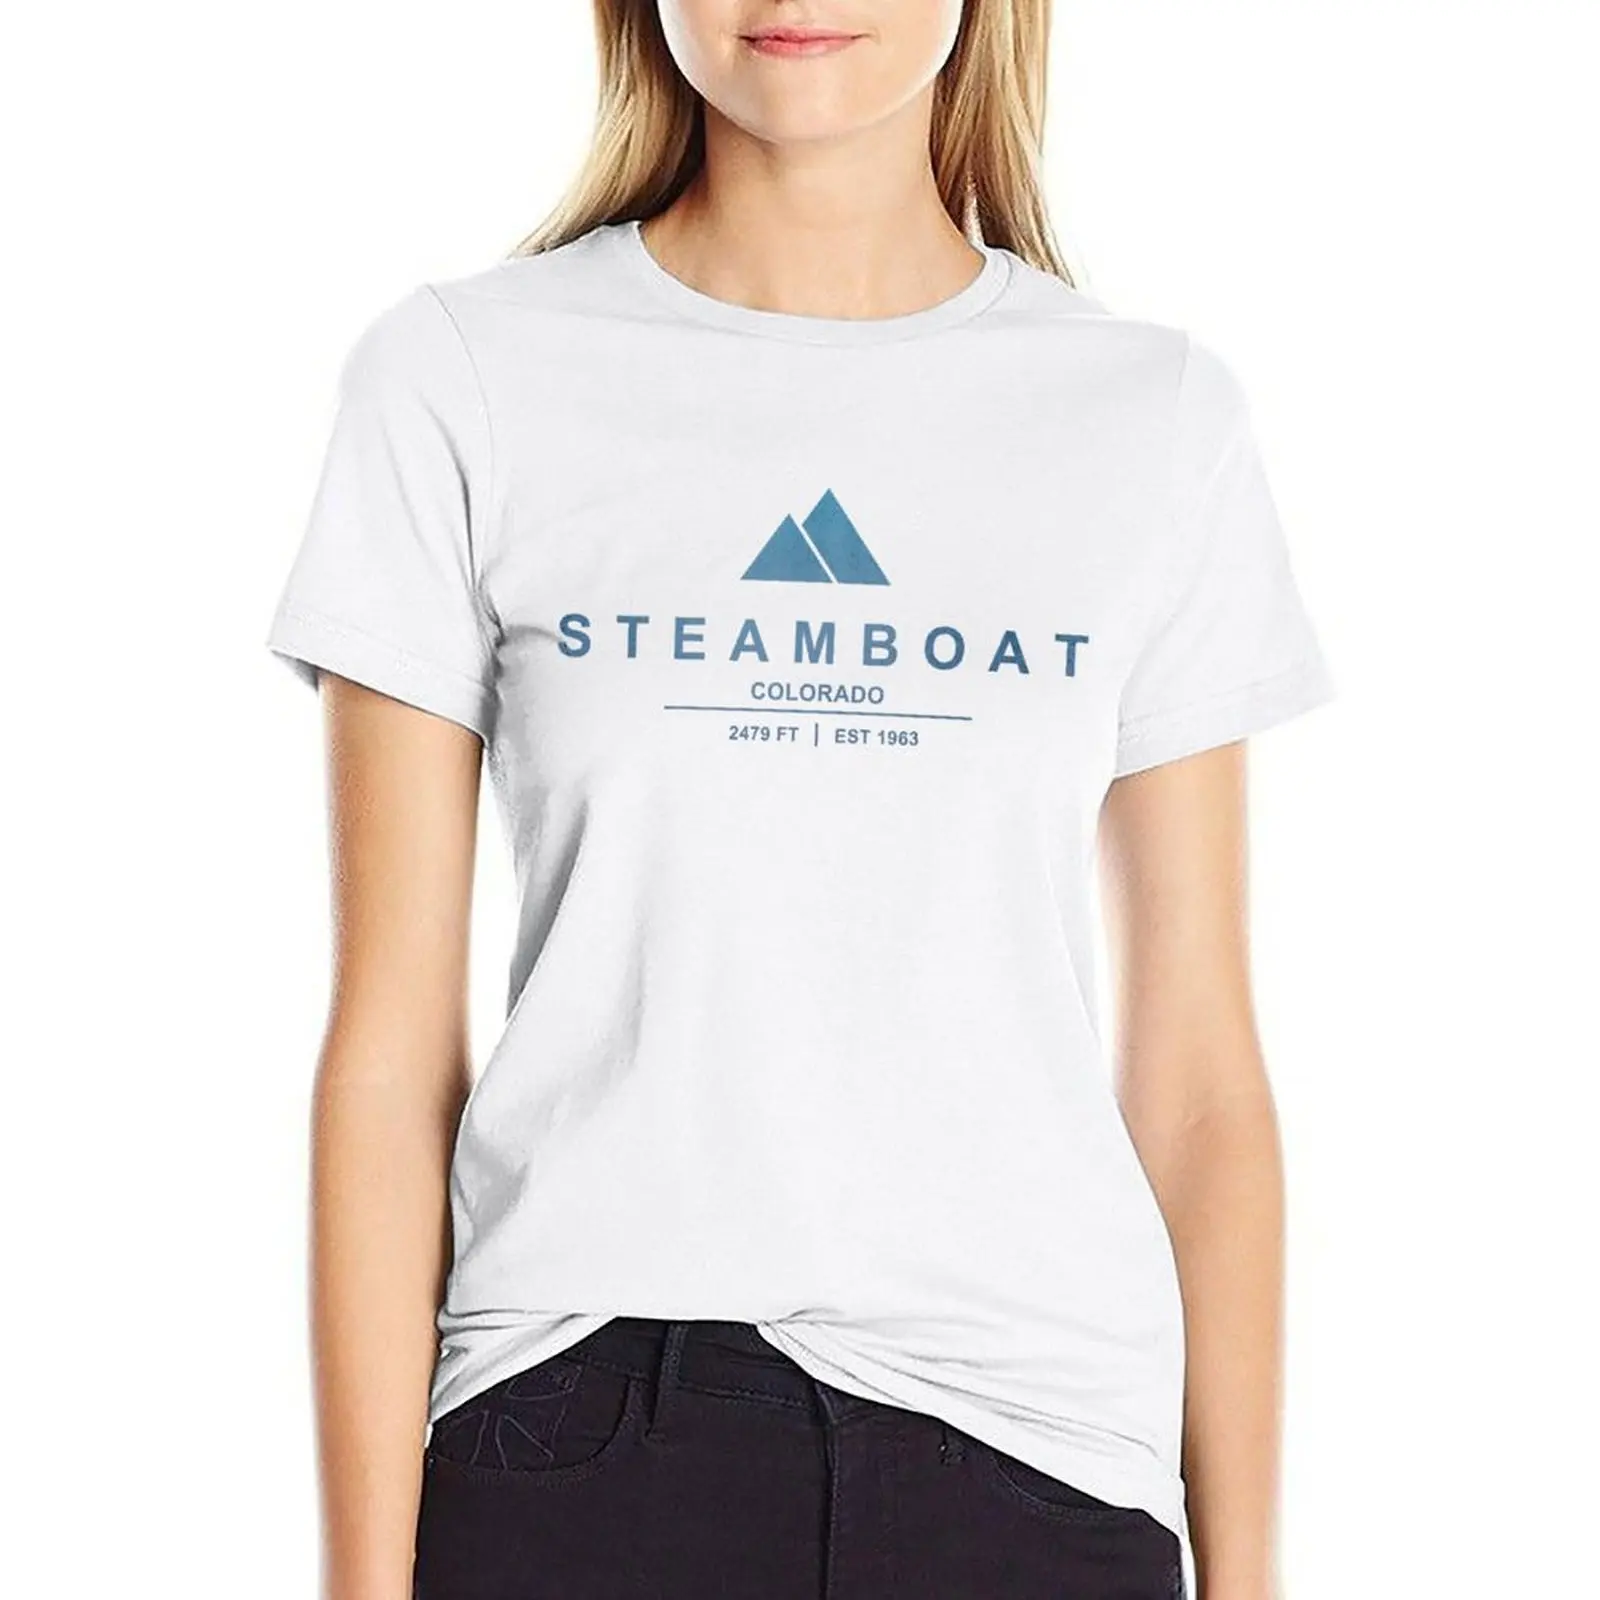 

Steamboat Ski Resort Colorado T-shirt tops Aesthetic clothing tight shirts for Women